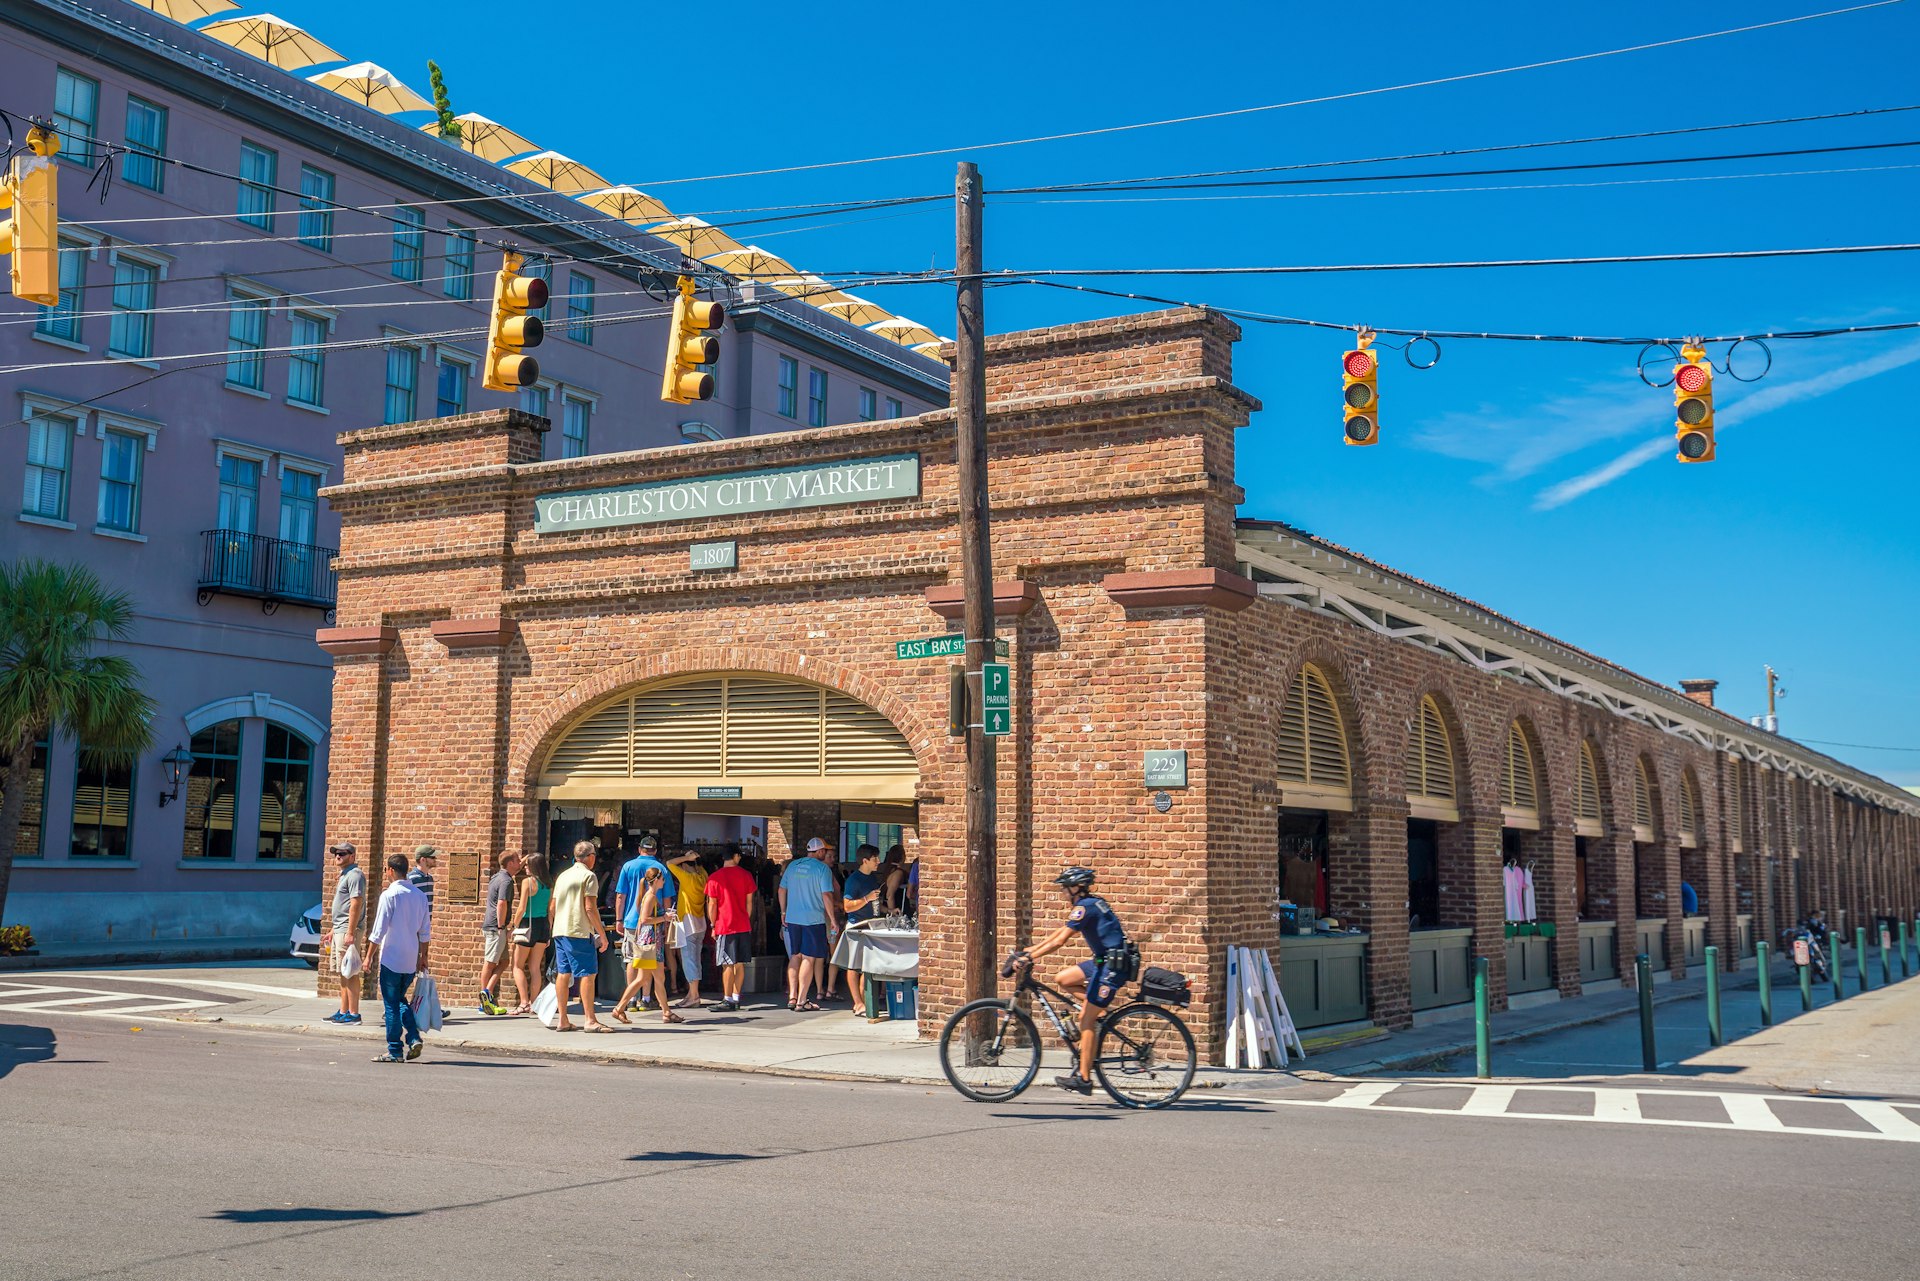 People queue to get into the historic Charleston City Market in Charleston, South Carolina. 